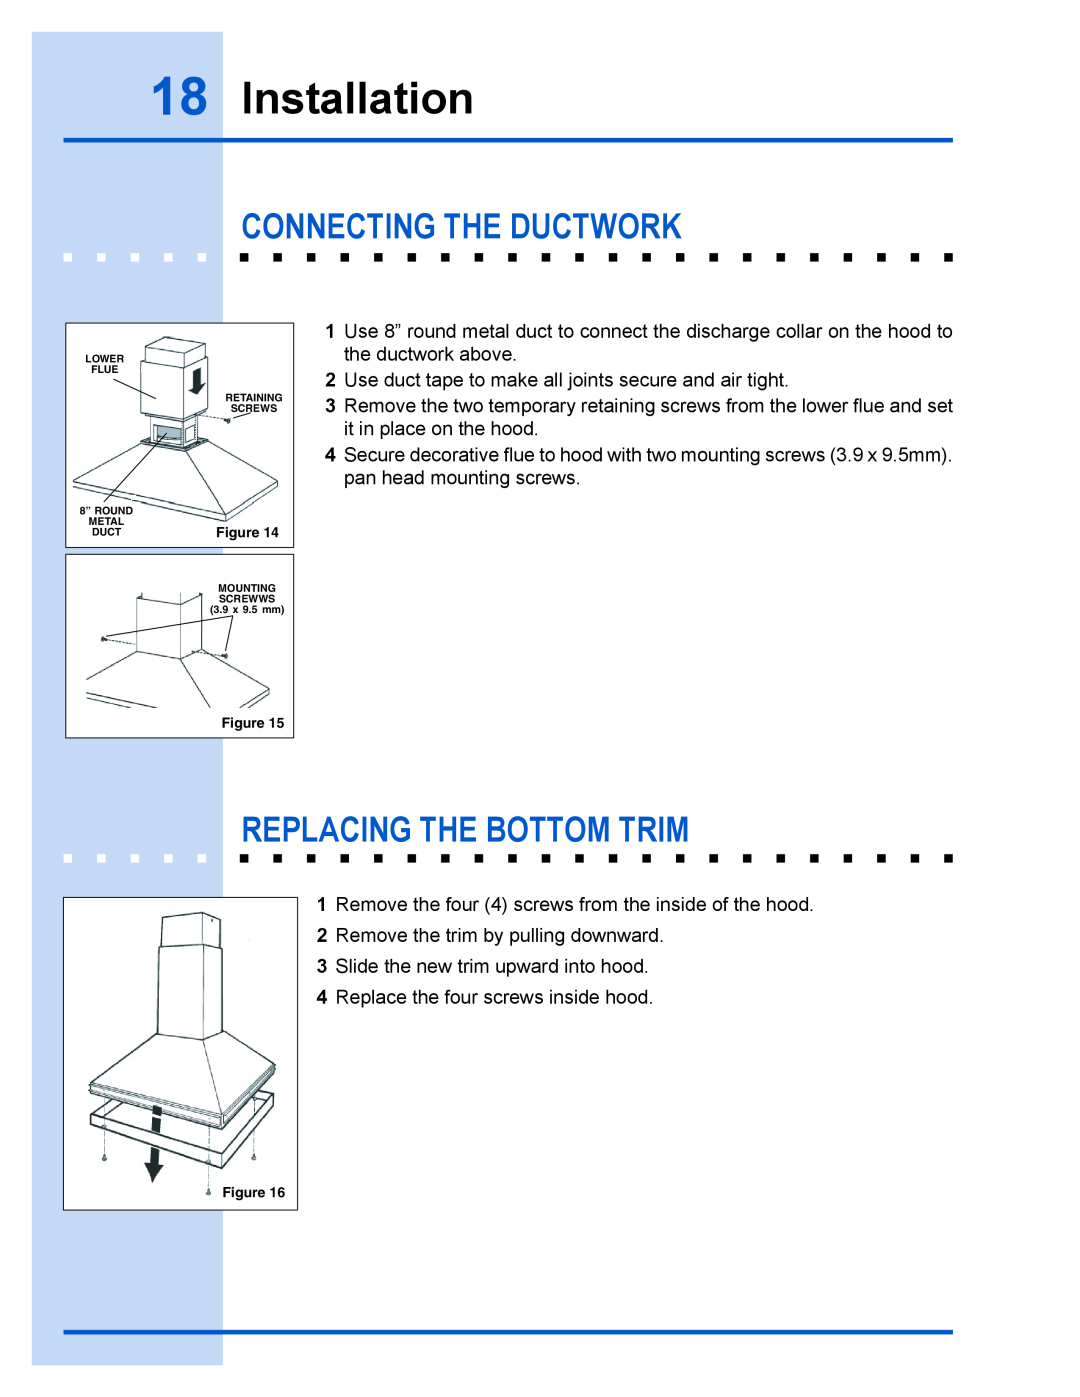 Electrolux E40PV100FS installation instructions Installation, Connecting The Ductwork, Replacing The Bottom Trim 